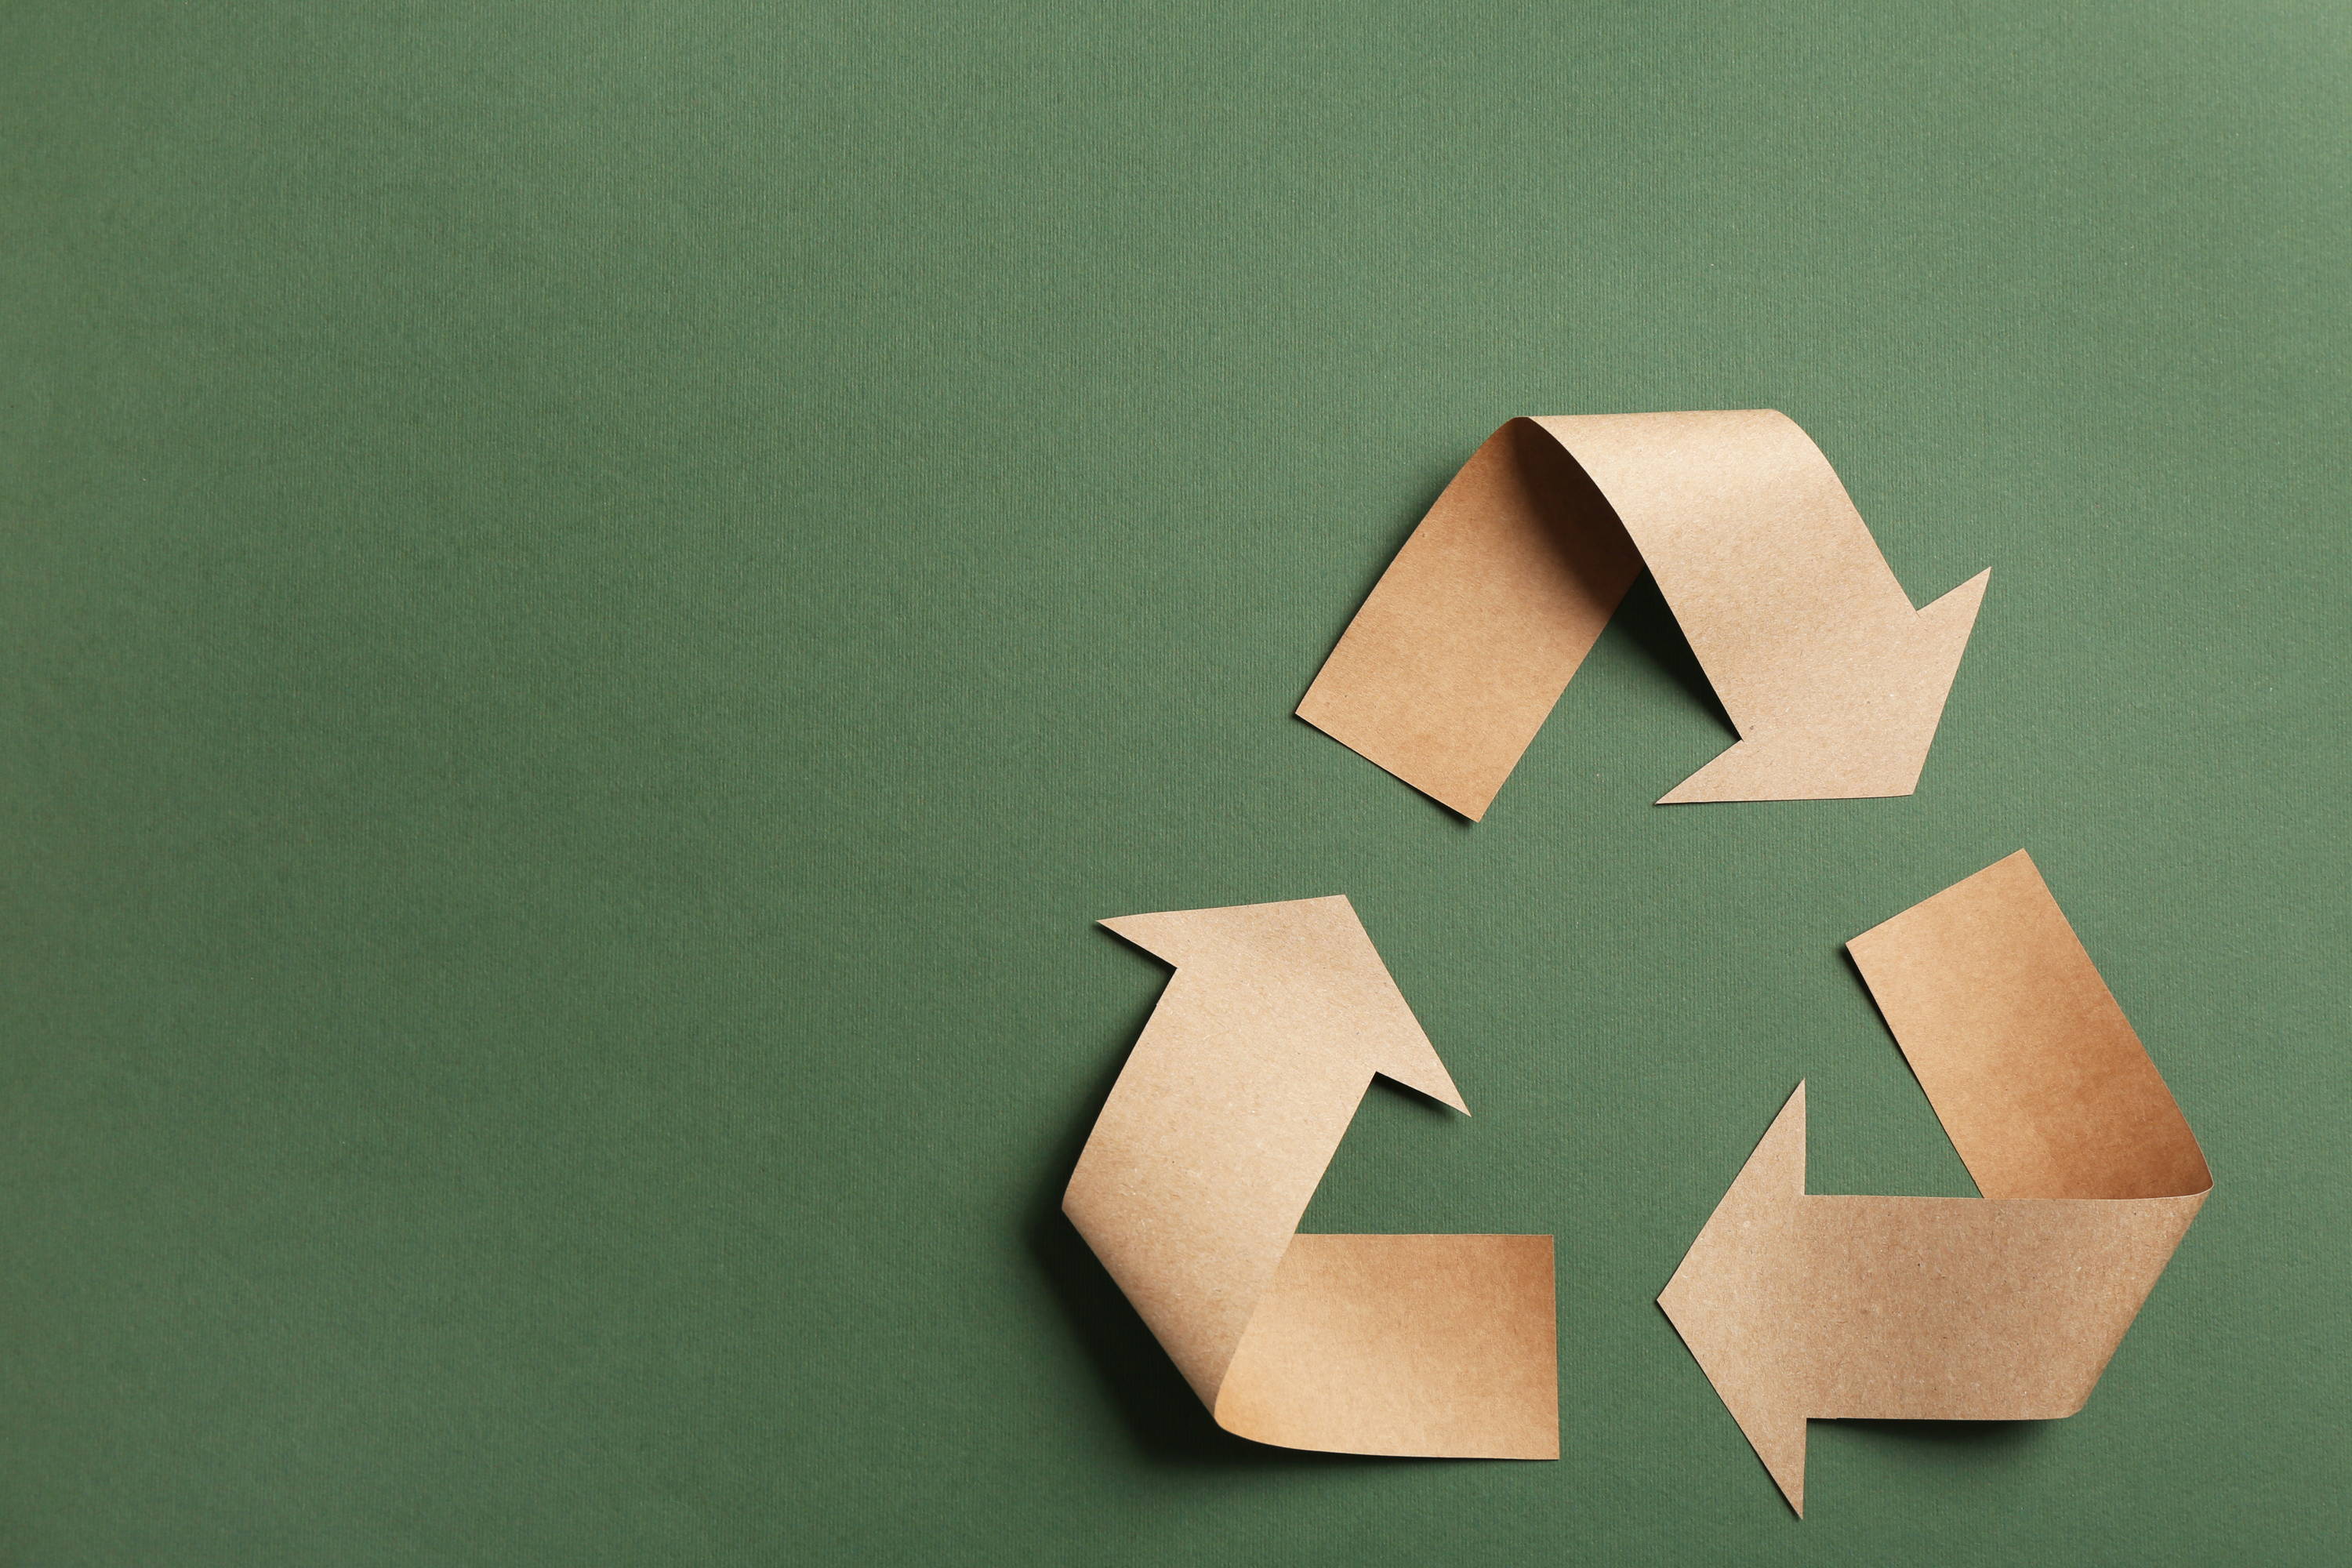 Tips To Make Your Business More Sustainable